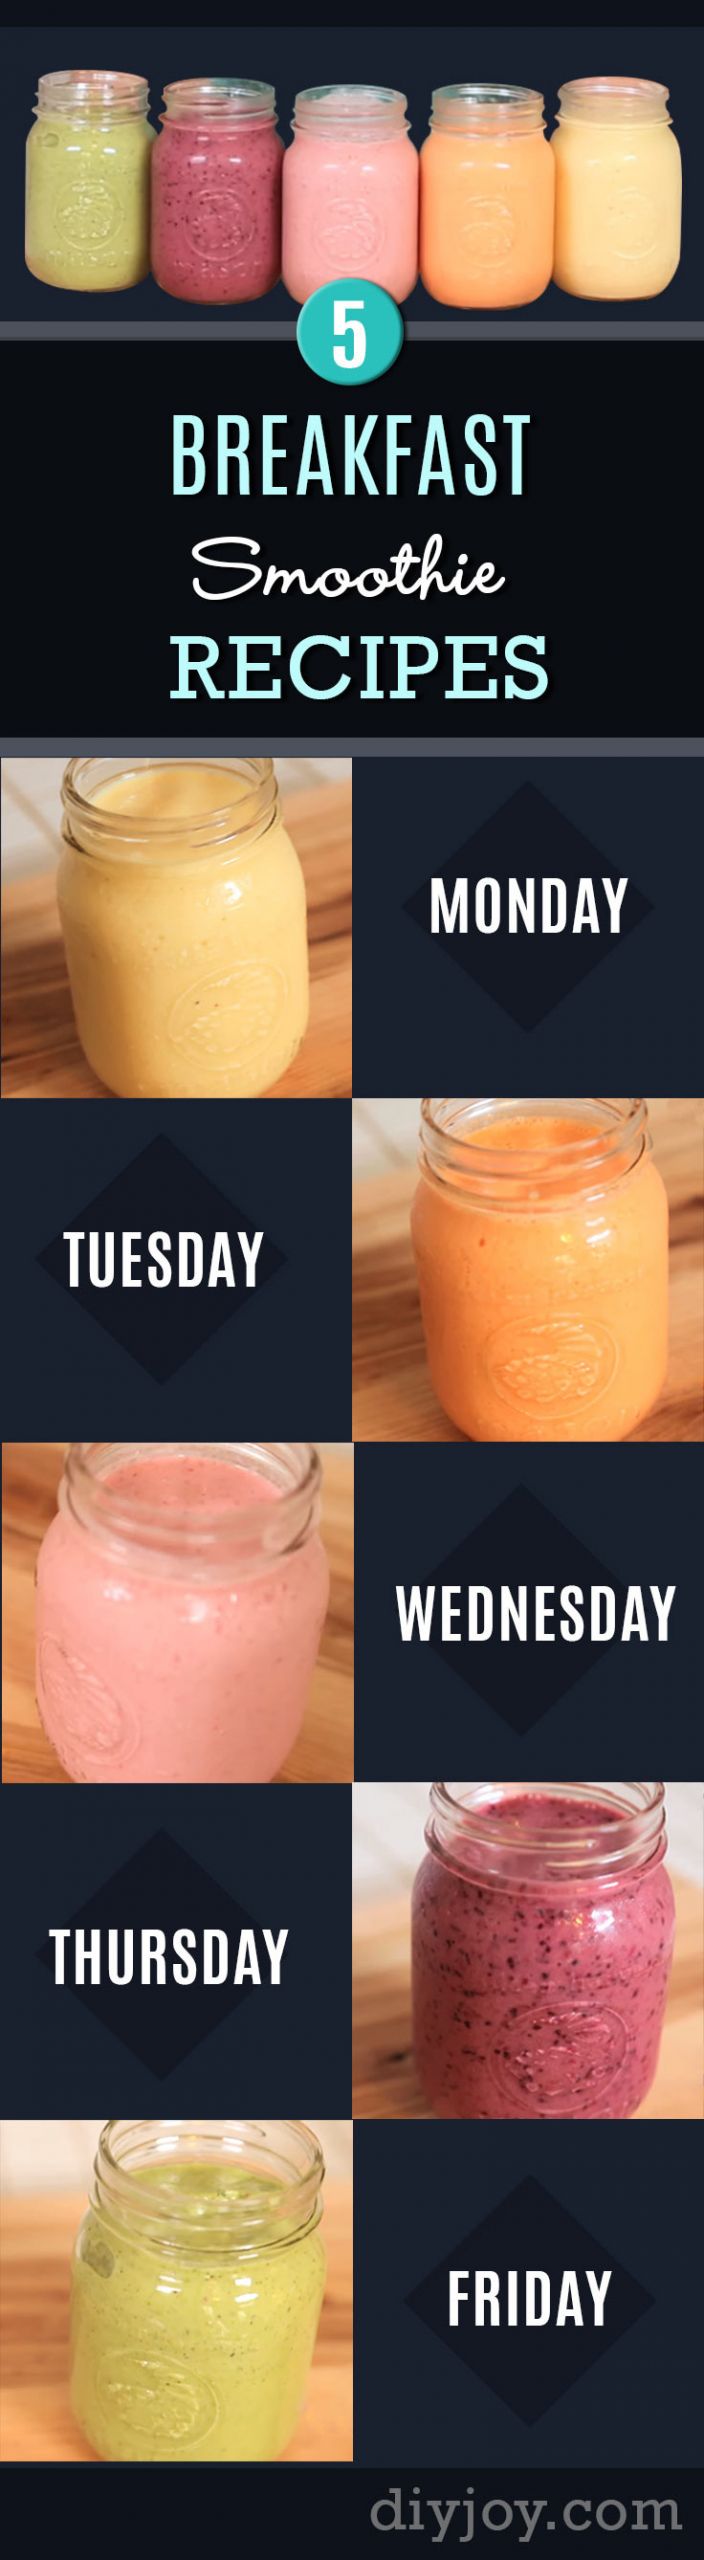 Low Calorie Smoothie Recipes For Weight Loss
 Monday to Friday 5 Breakfast Smoothie Recipes